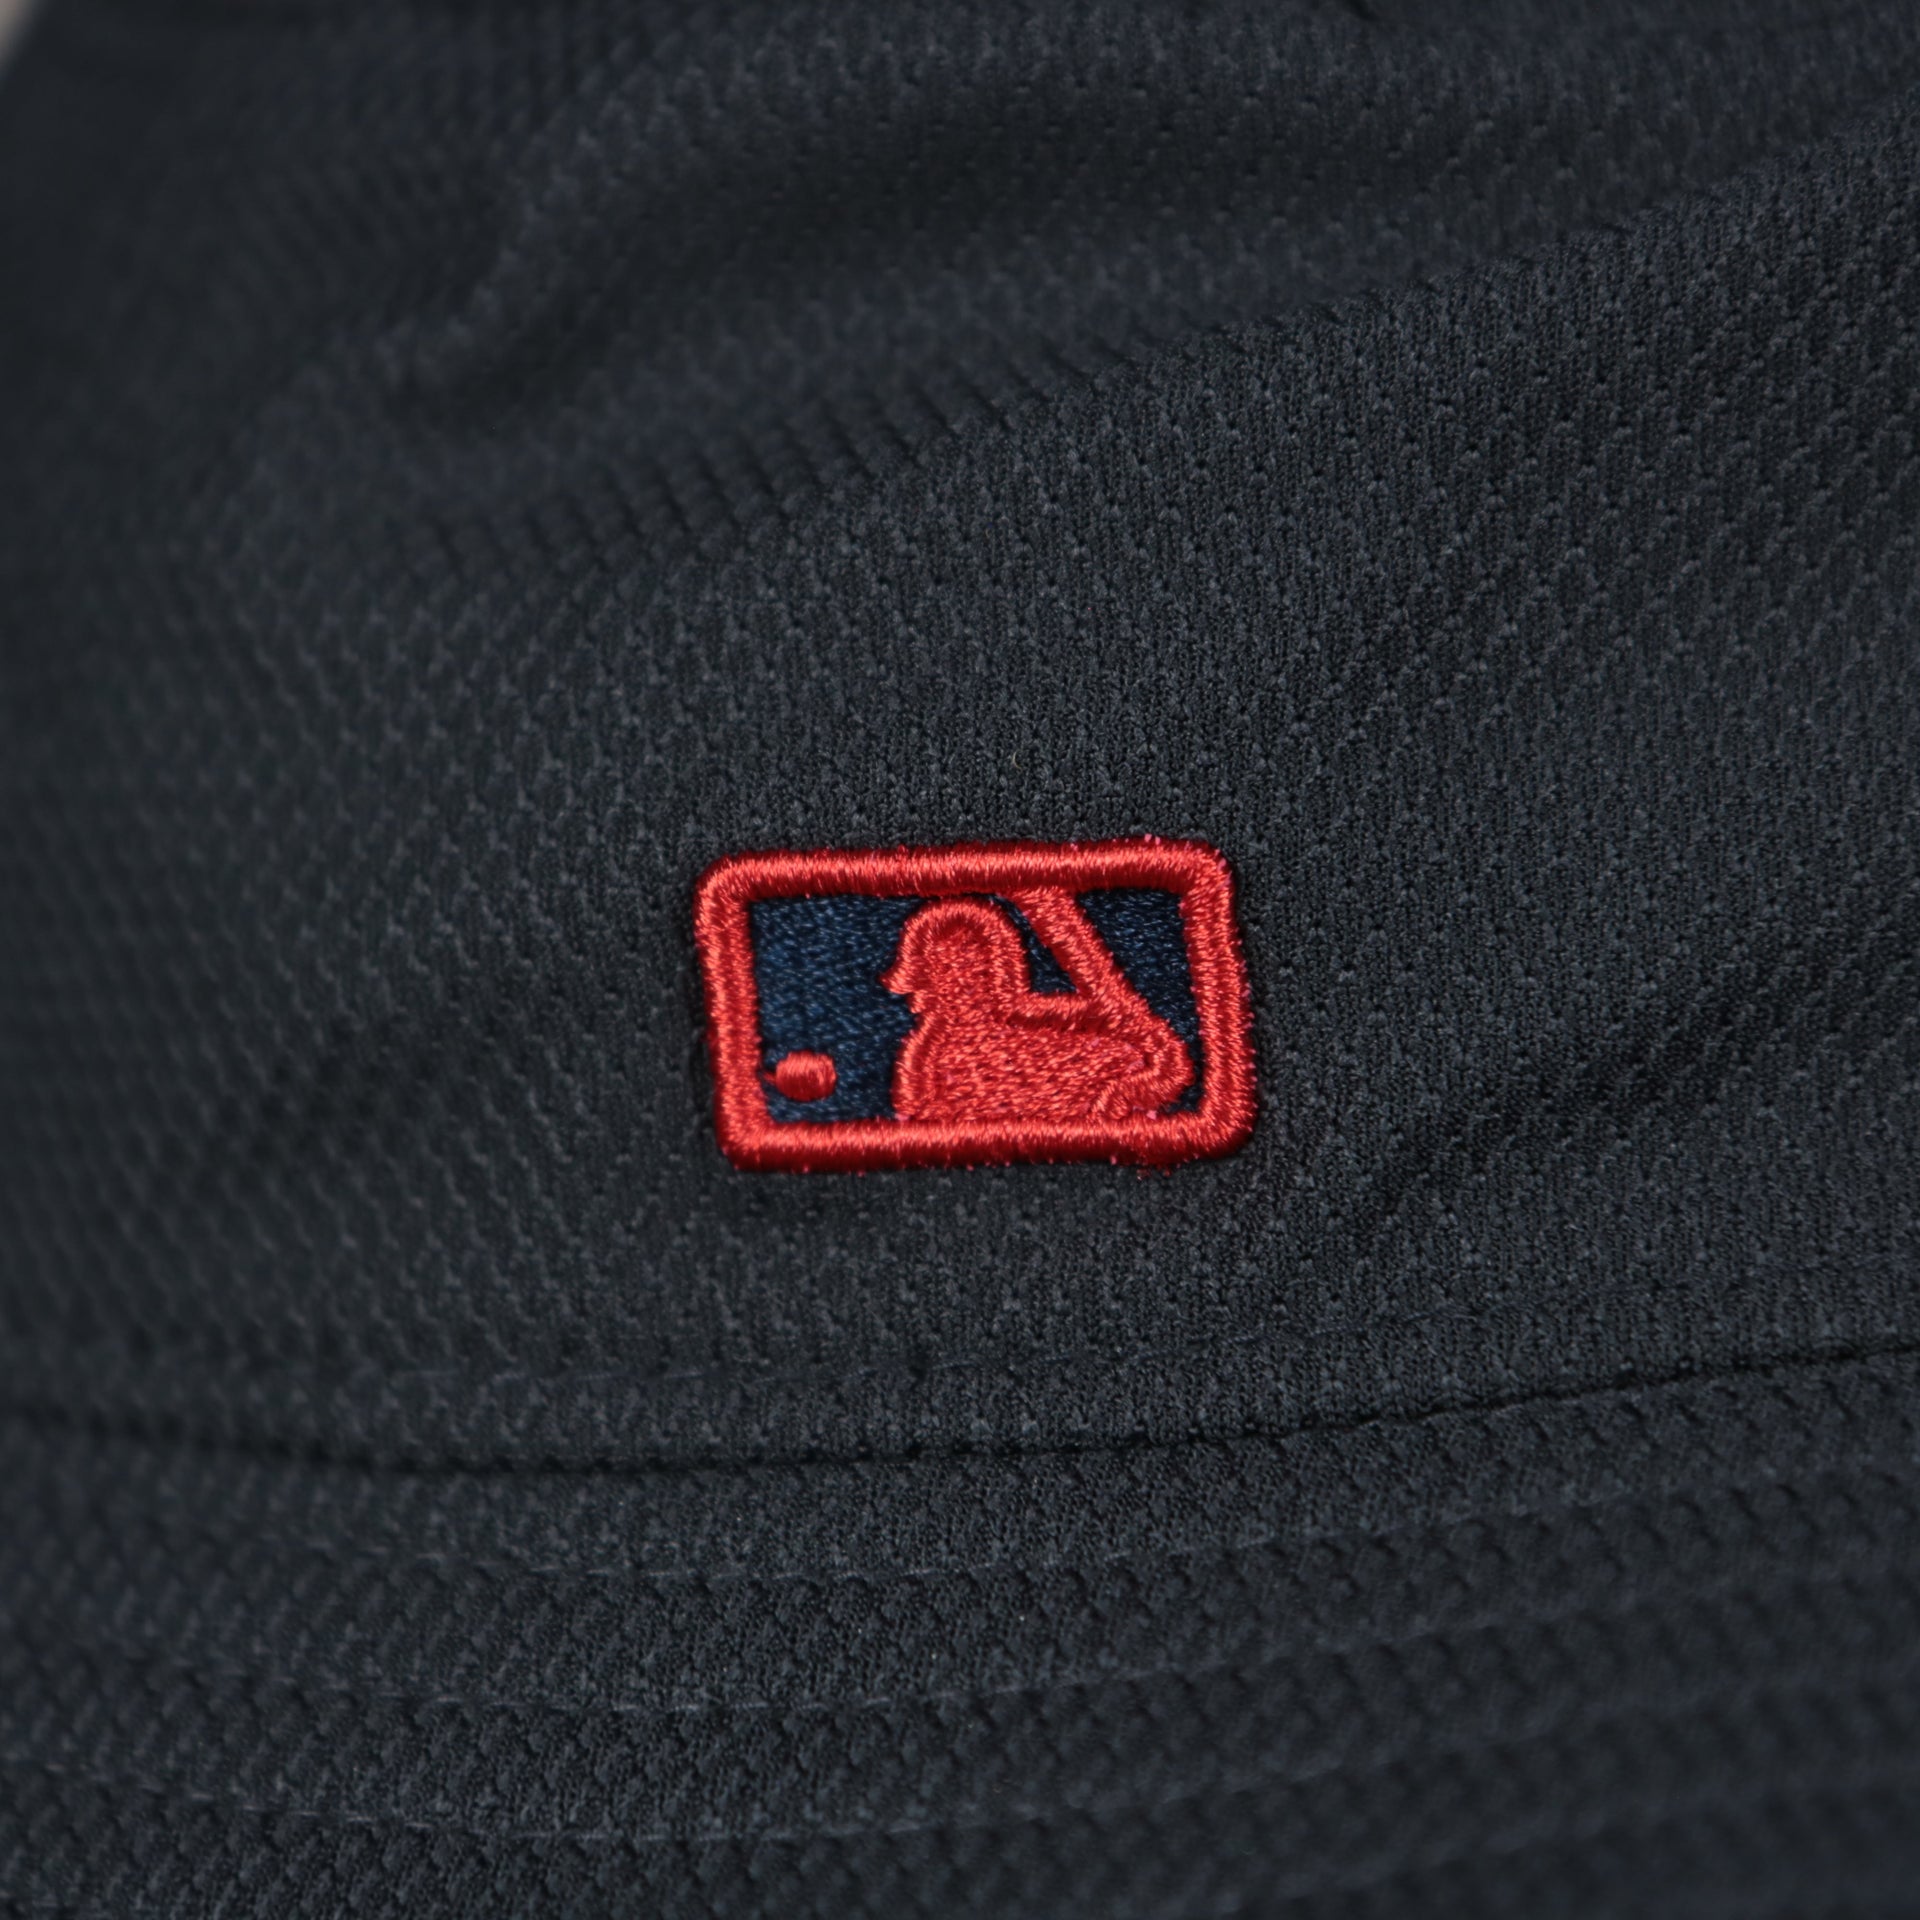 A close up of the MLB Batterman on the Atlanta Braves MLB 2022 Spring Training Onfield Bucket Hat